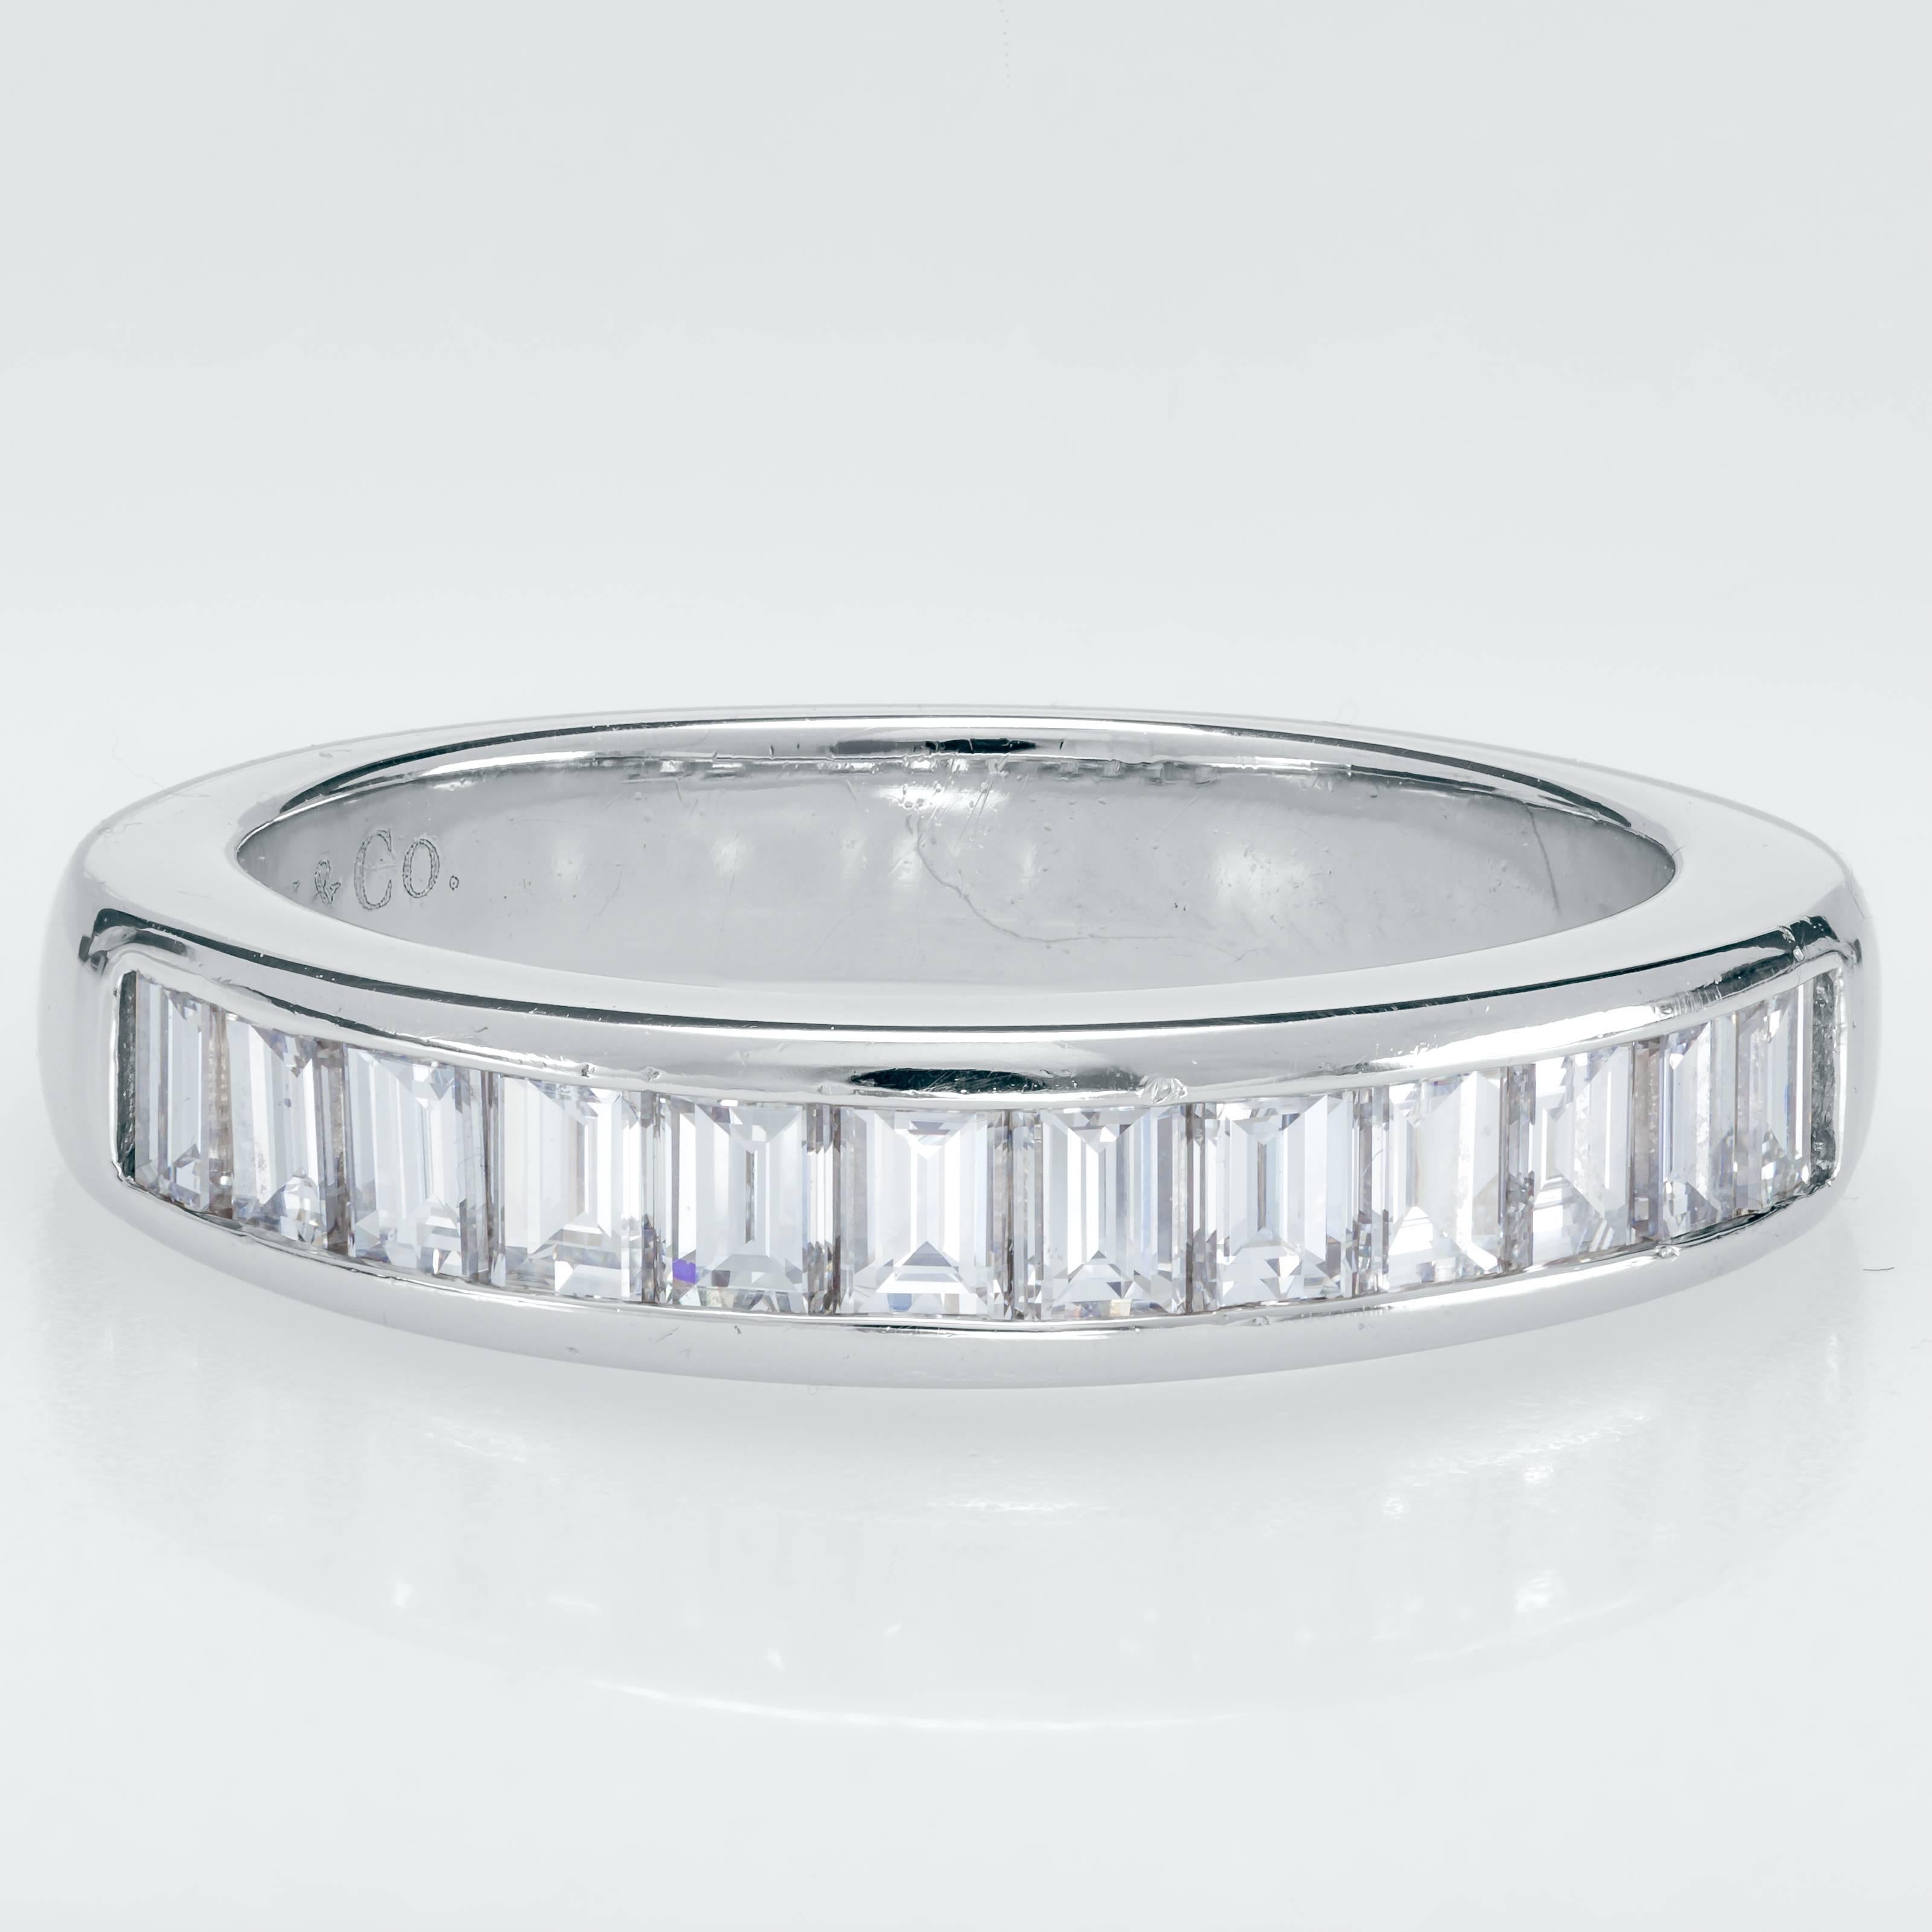 This Tiffany & Co. ring features 12 channel set baguette diamonds totaling 0.96ct set in a platinum band.  The round band measures 21mm diameter and 4mm thick.  It fits a finger size 6.  It has minor wear on the band and two very small marks by the